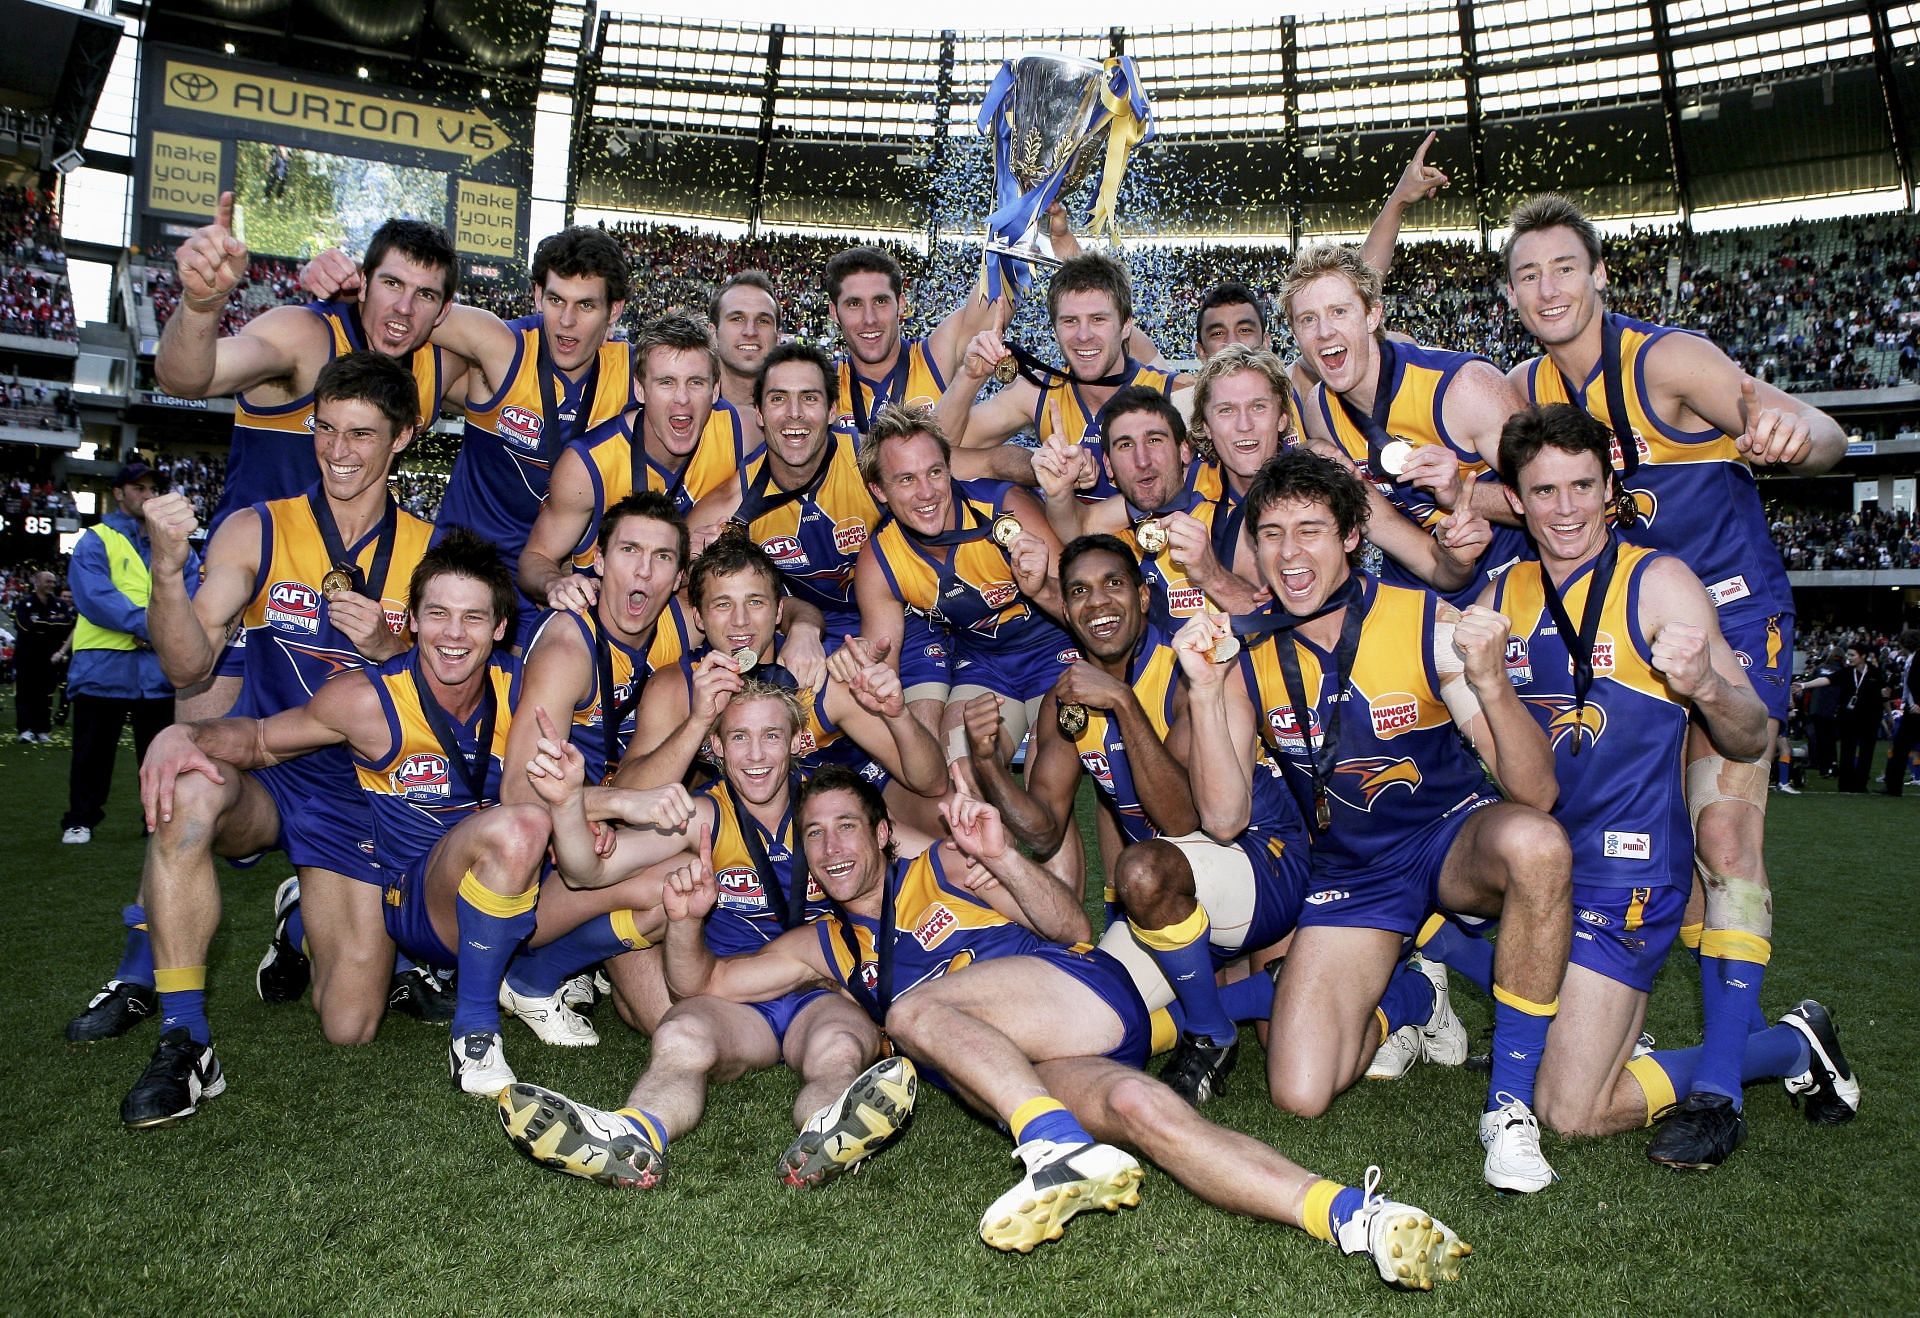 West Coast Eagles players celebrate after winning the AFL Grand Final match between the Sydney Swans and the West Coast Eagles